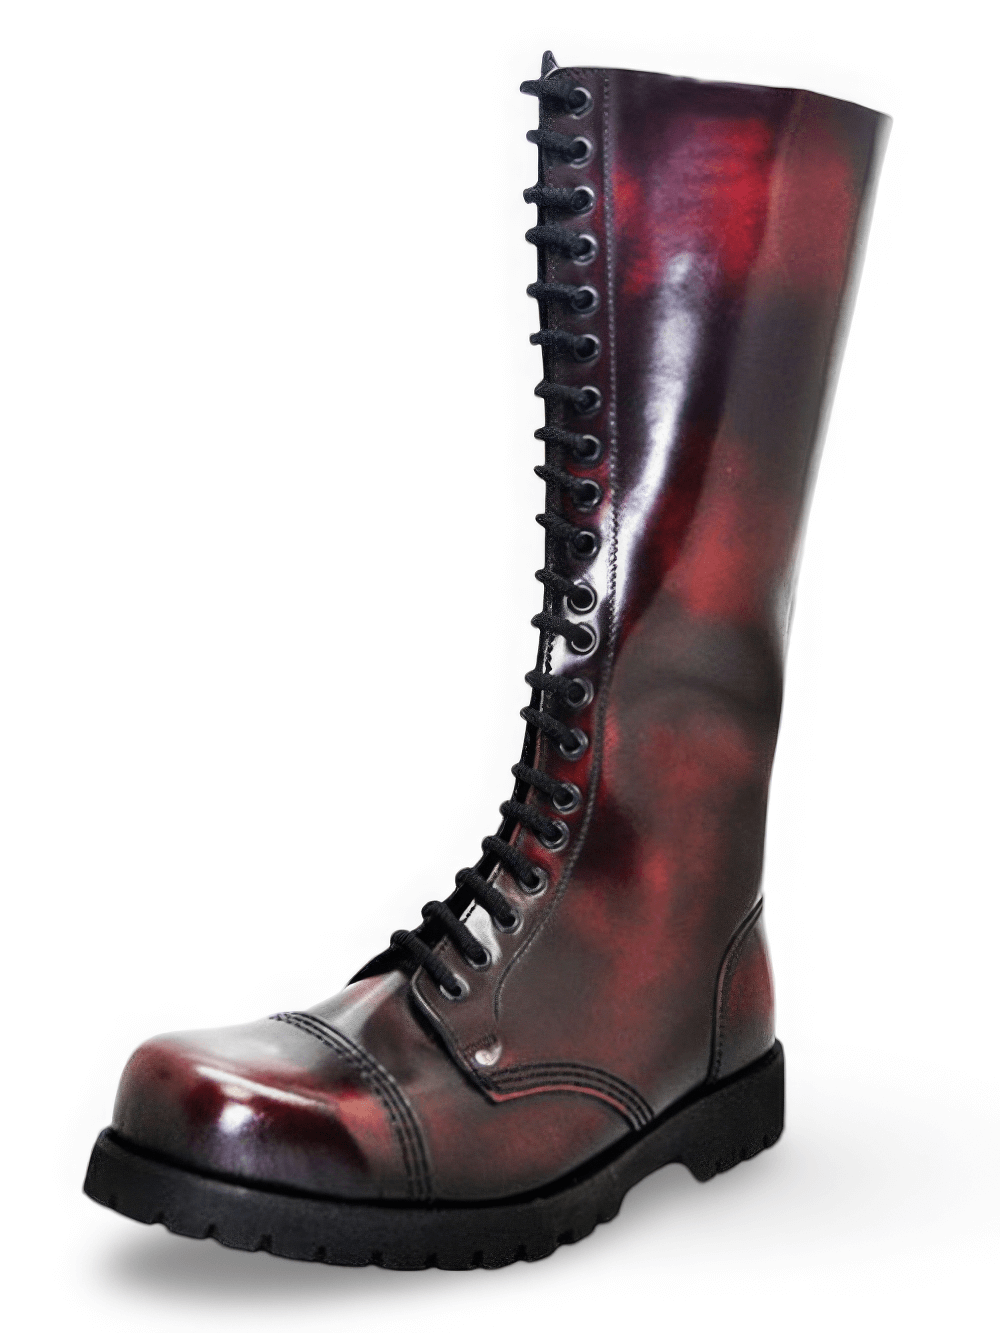 Wine Red 20 Eyelets Unisex Rangers Boots with Steel Toe